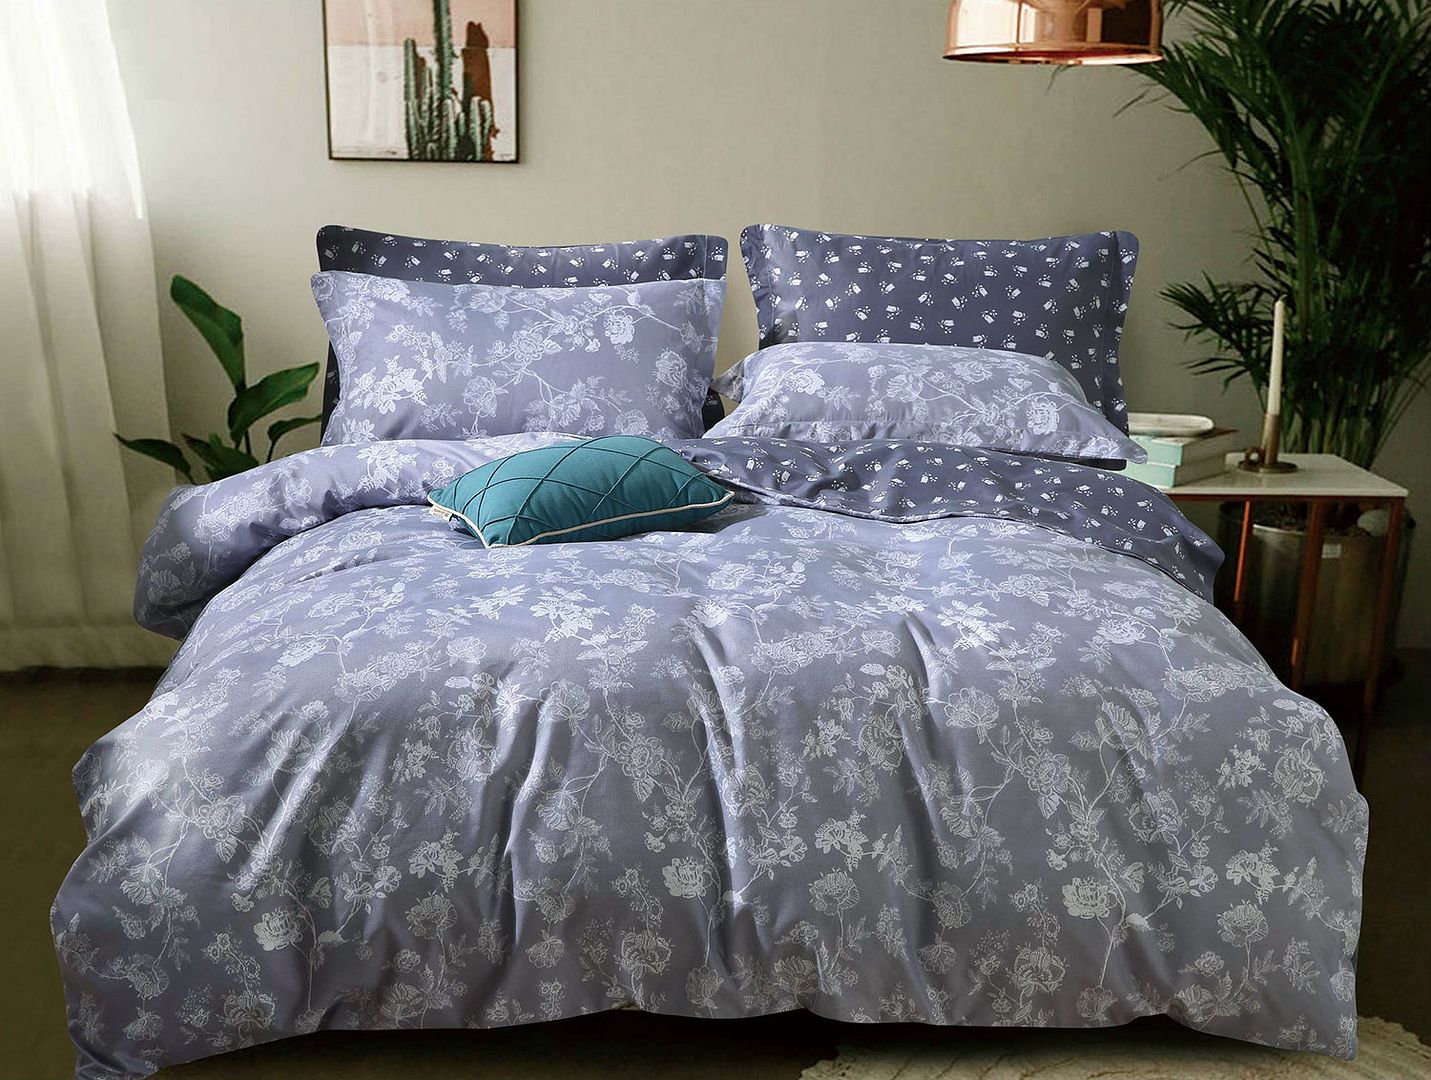 Artistic Quilt Cover Set -Queen/King/Super King Size- M342